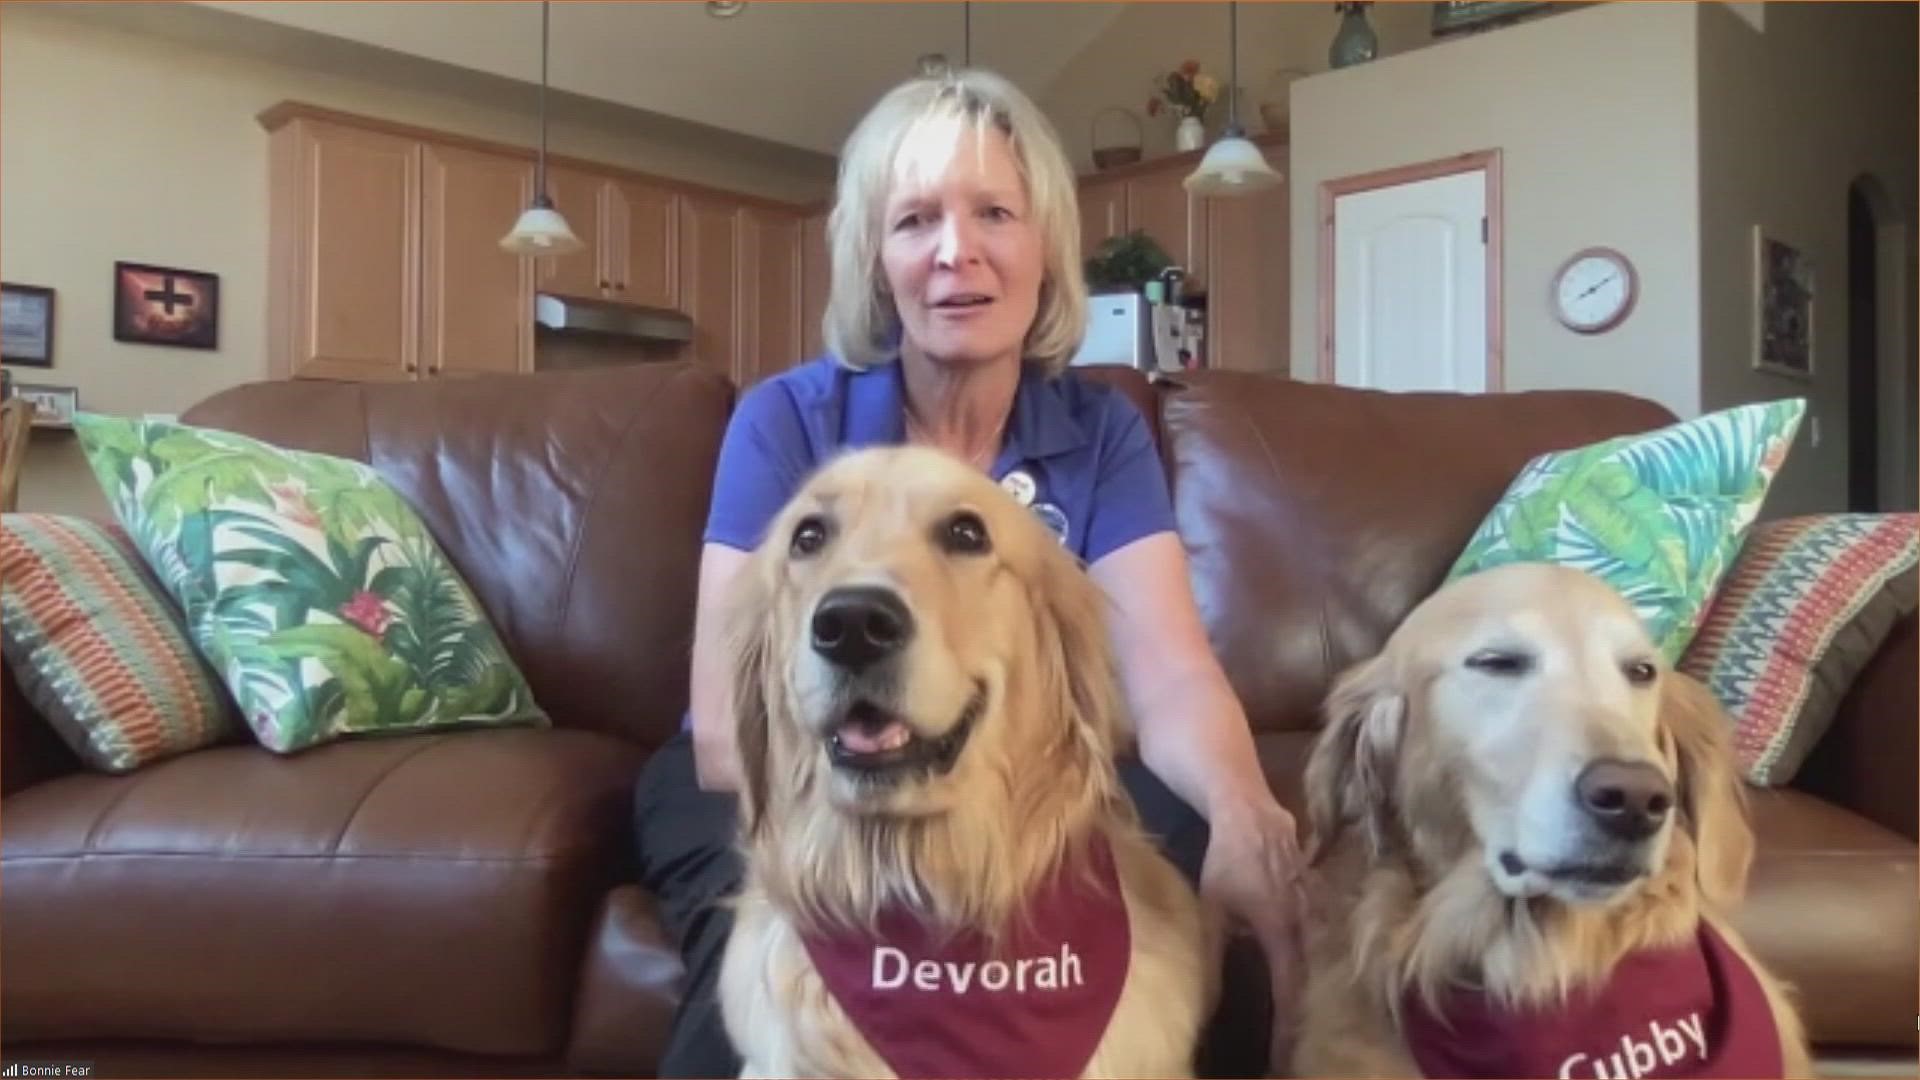 The golden retrievers have been invited back to Uvalde for the first three weeks of school.